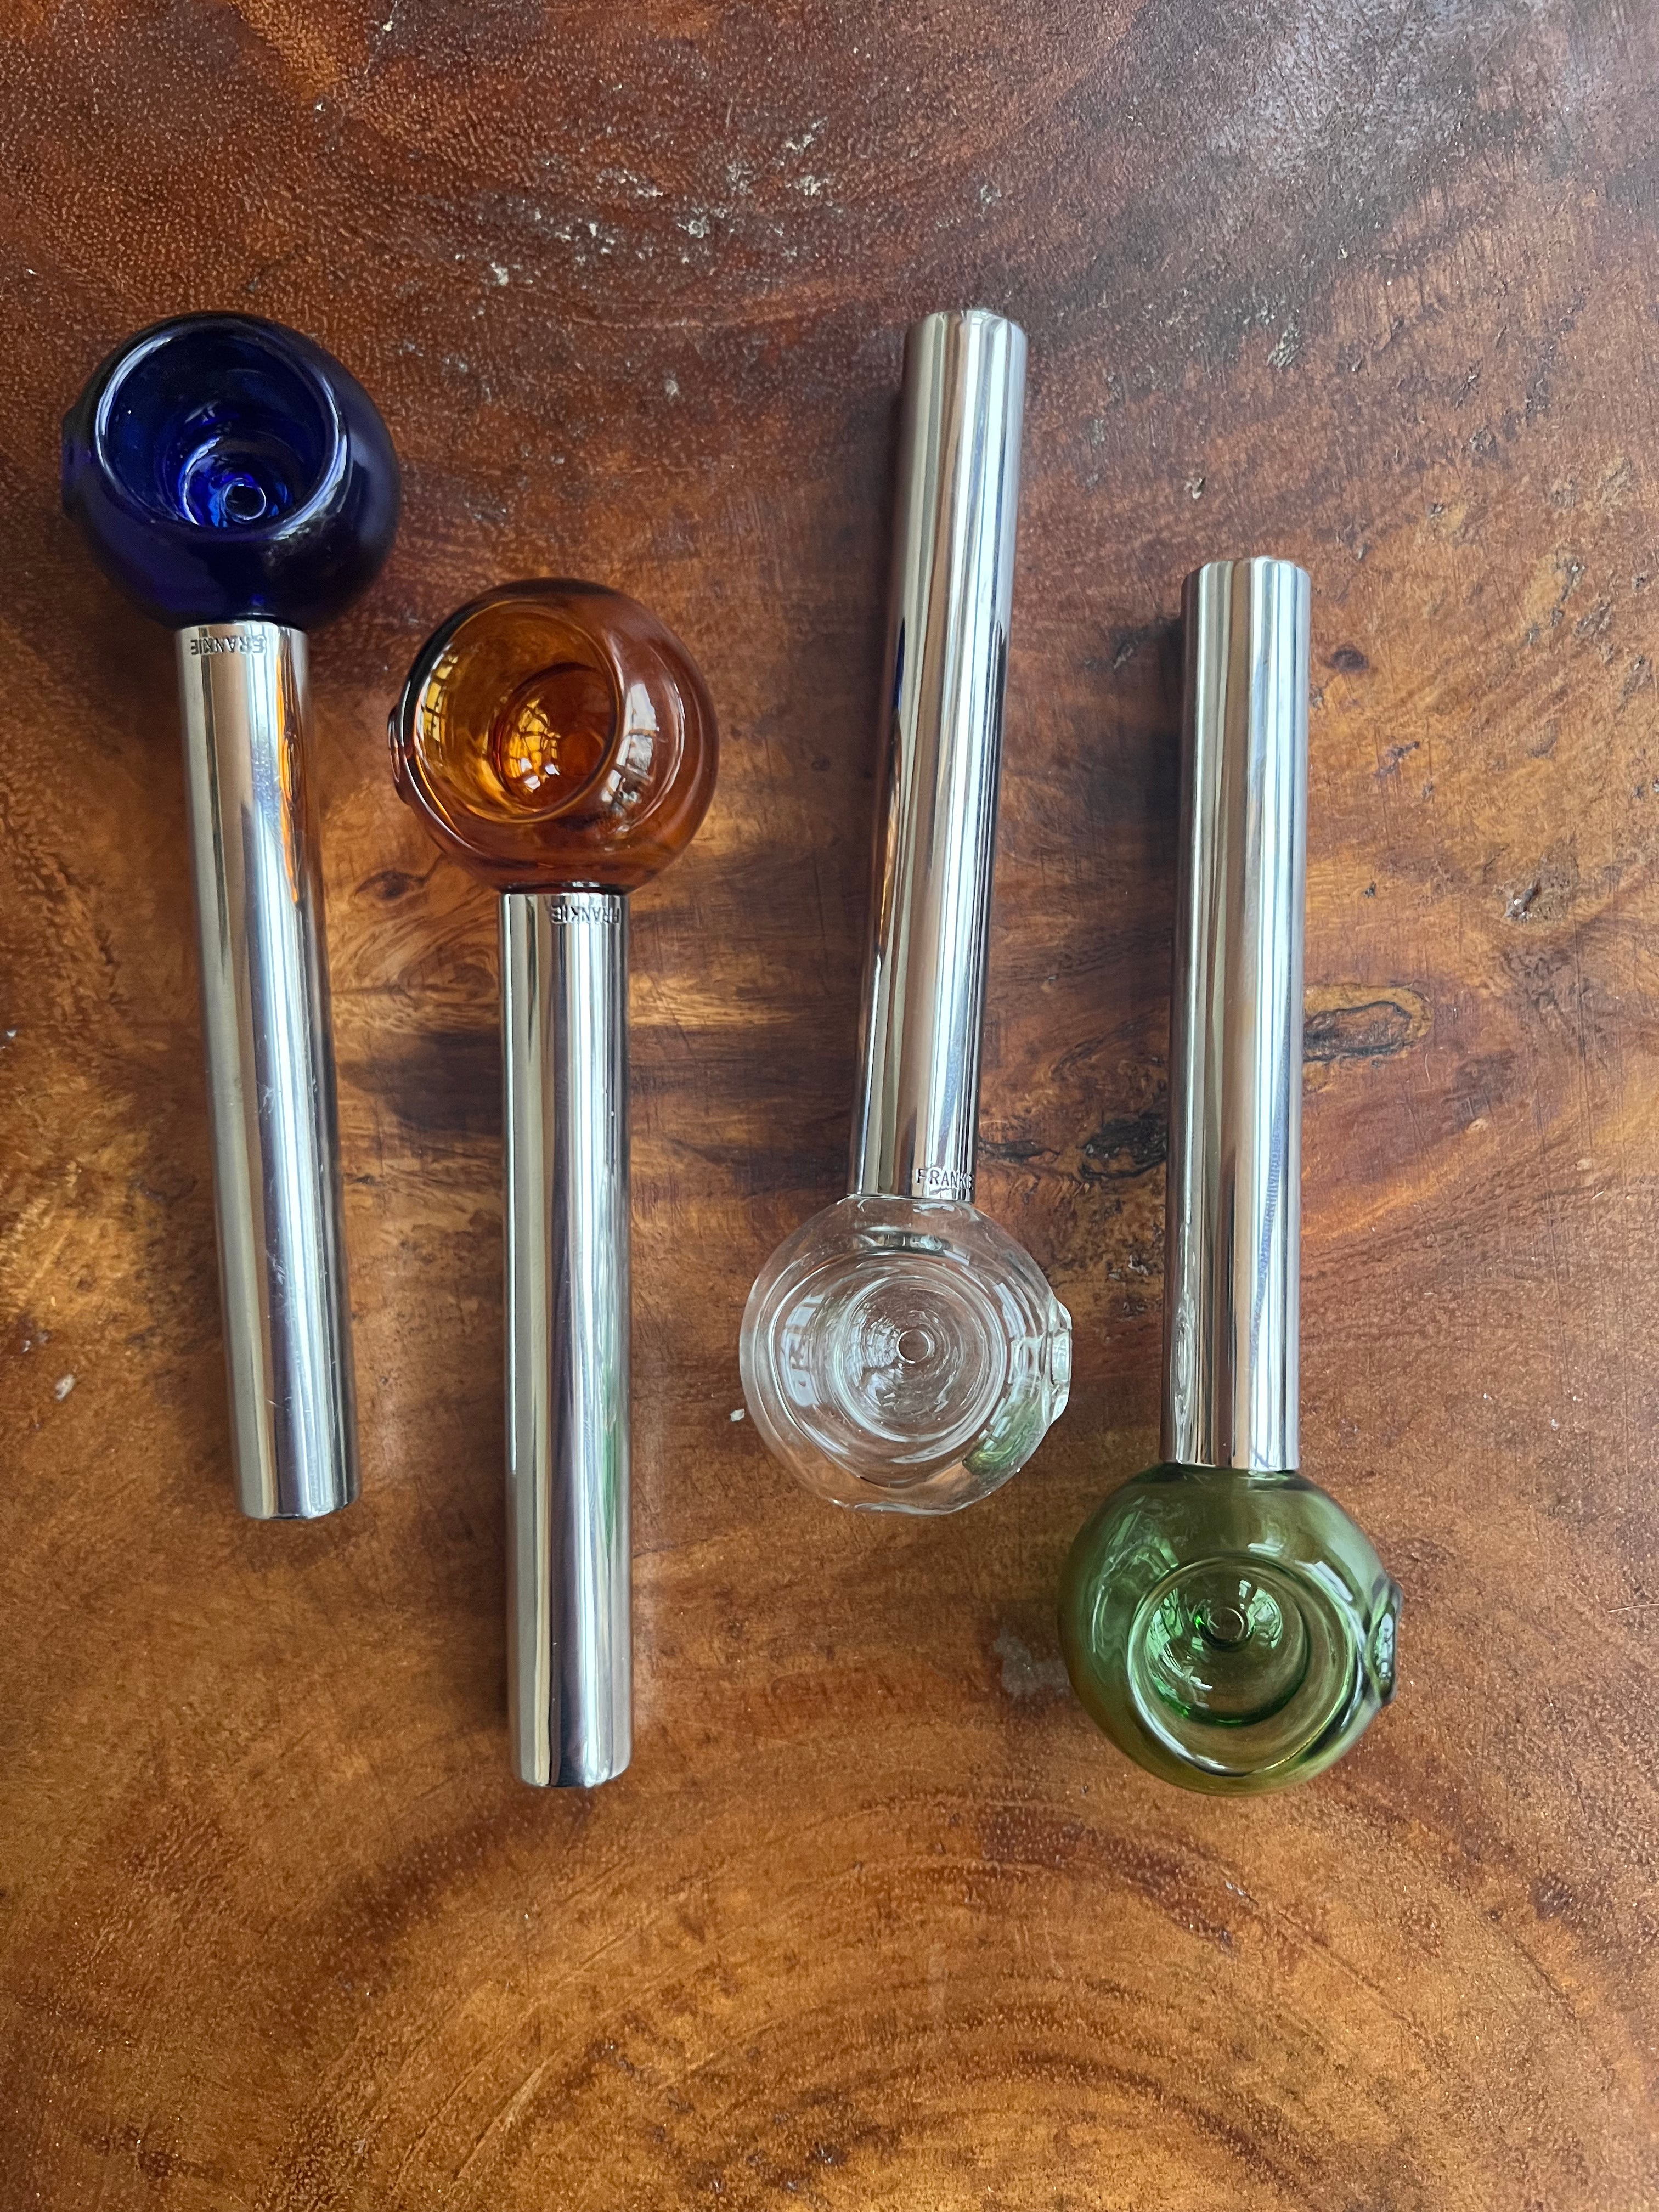 LIMITED EDITION BOWL PIPES